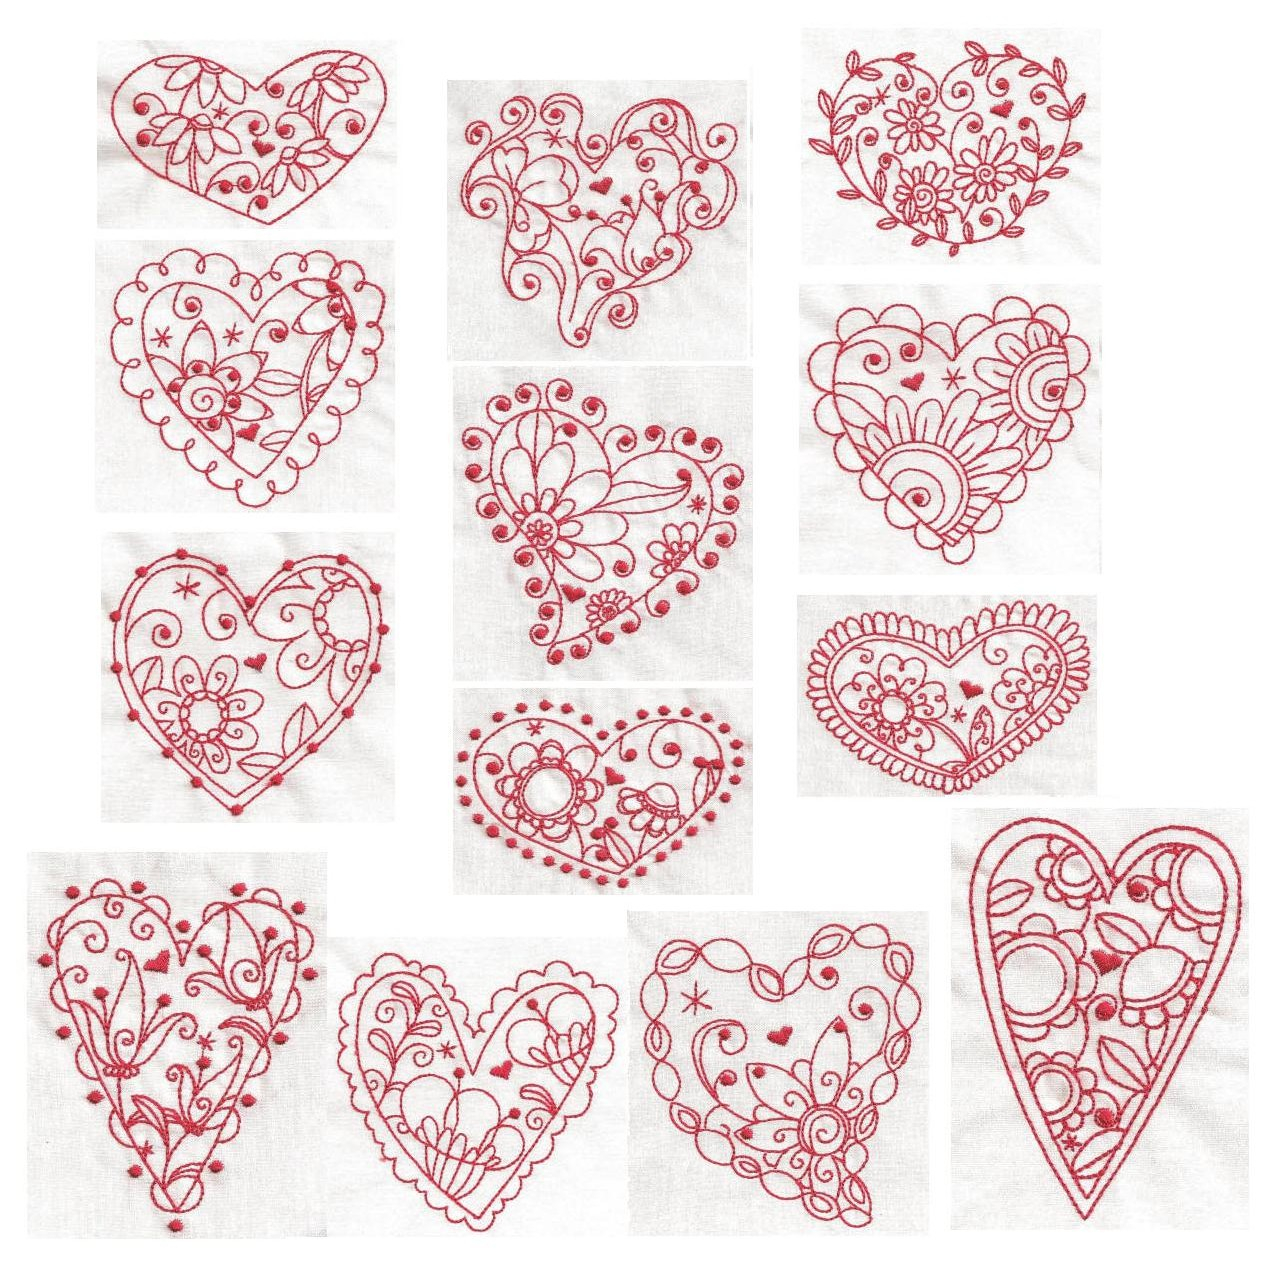 Free Redwork Embroidery Patterns 13 Best Photos Of Free Redwork Patterns Free Redwork Embroidery